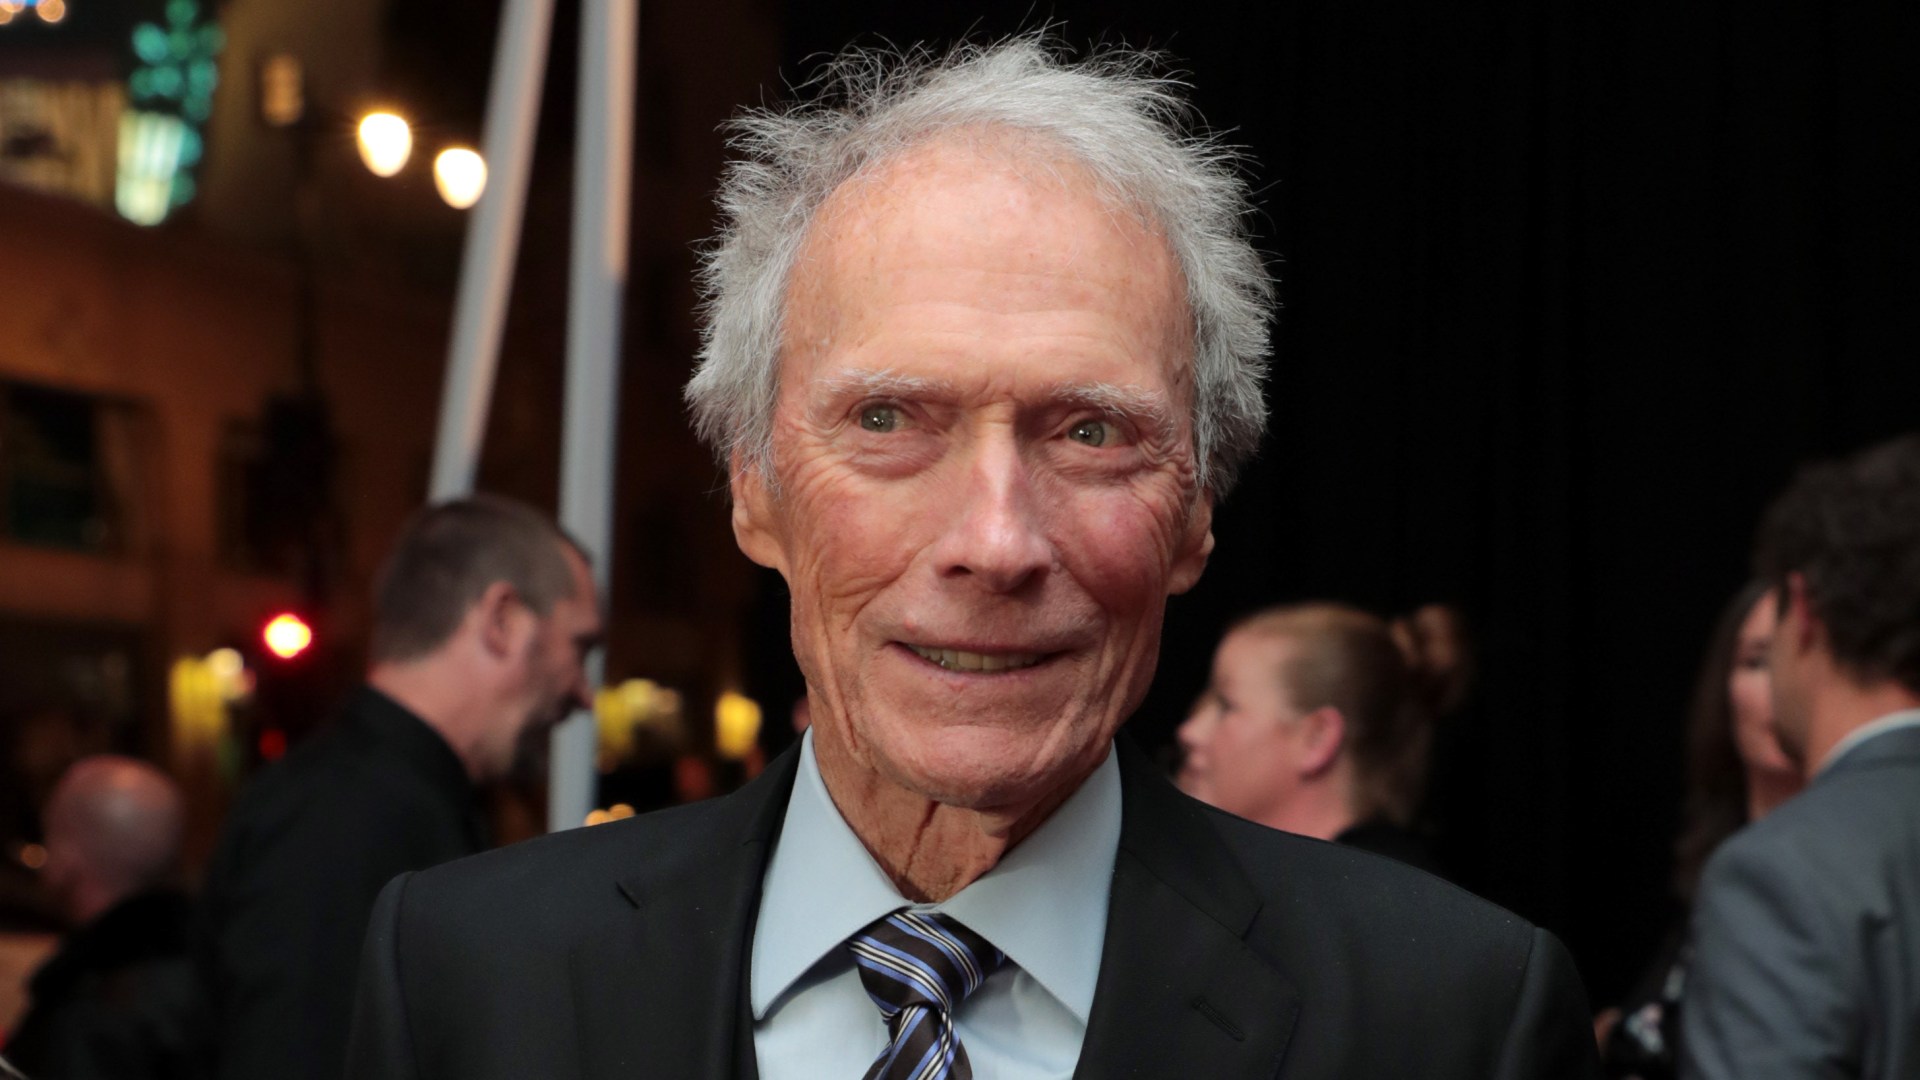 Clint Eastwood's Net Worth How Much Money Has the Actor Made?